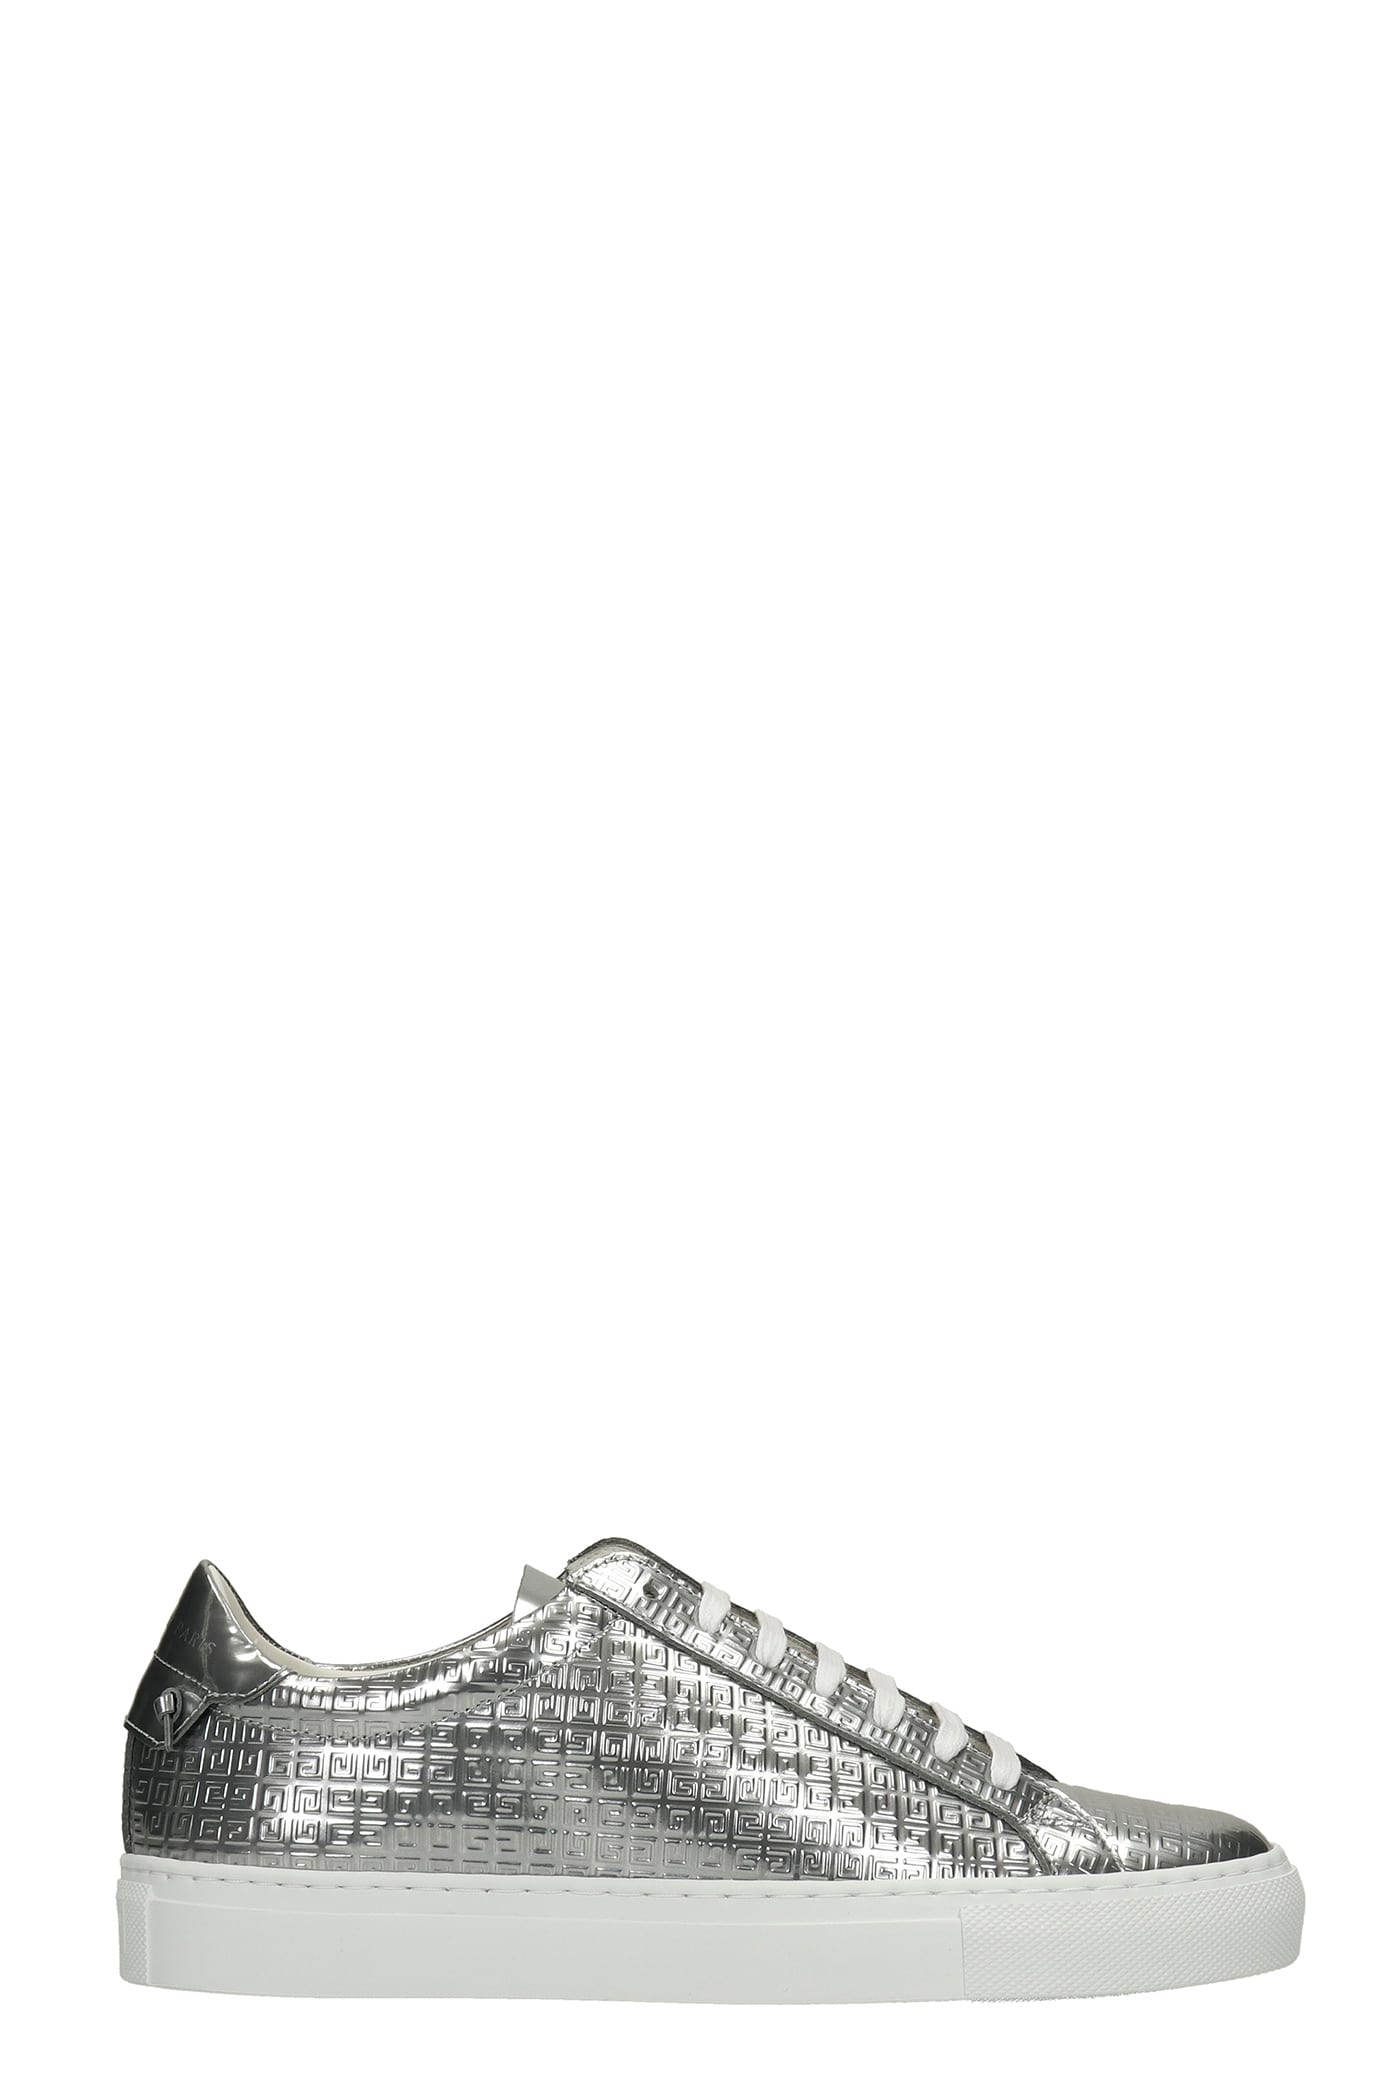 Givenchy Urban Street Sneakers In Silver Leather